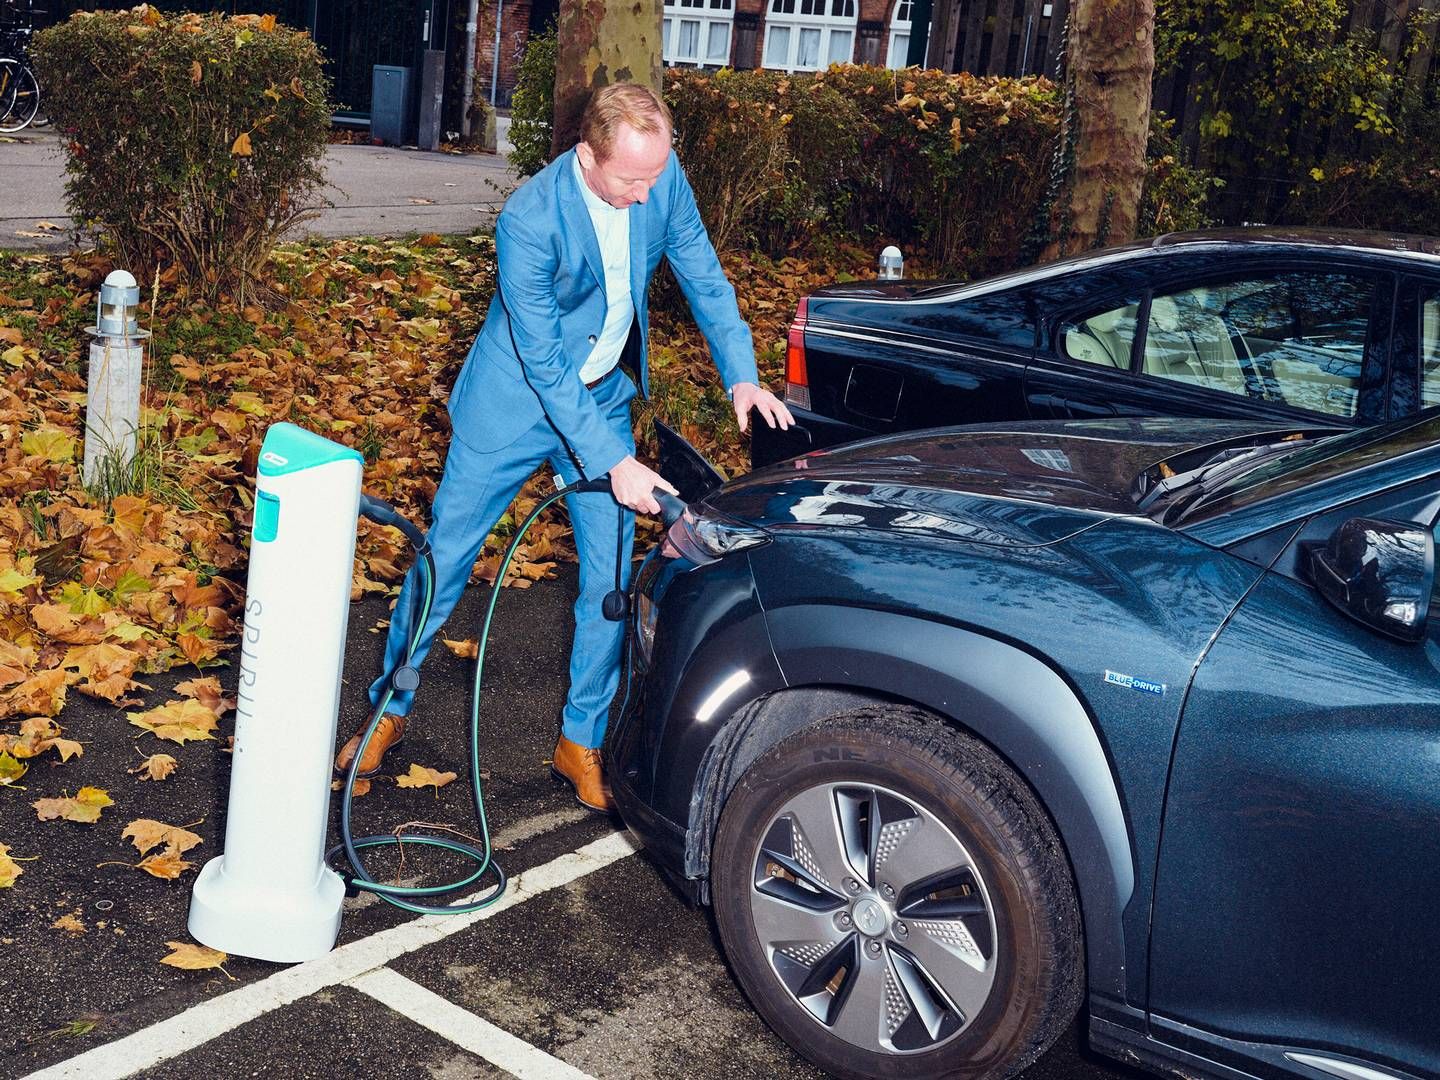 "The solution offers new revenue streams for adopters, potentially accelerating the shift to electric transportation even further," says CEO Tore Harritshøj. | Photo: Pr Spirii